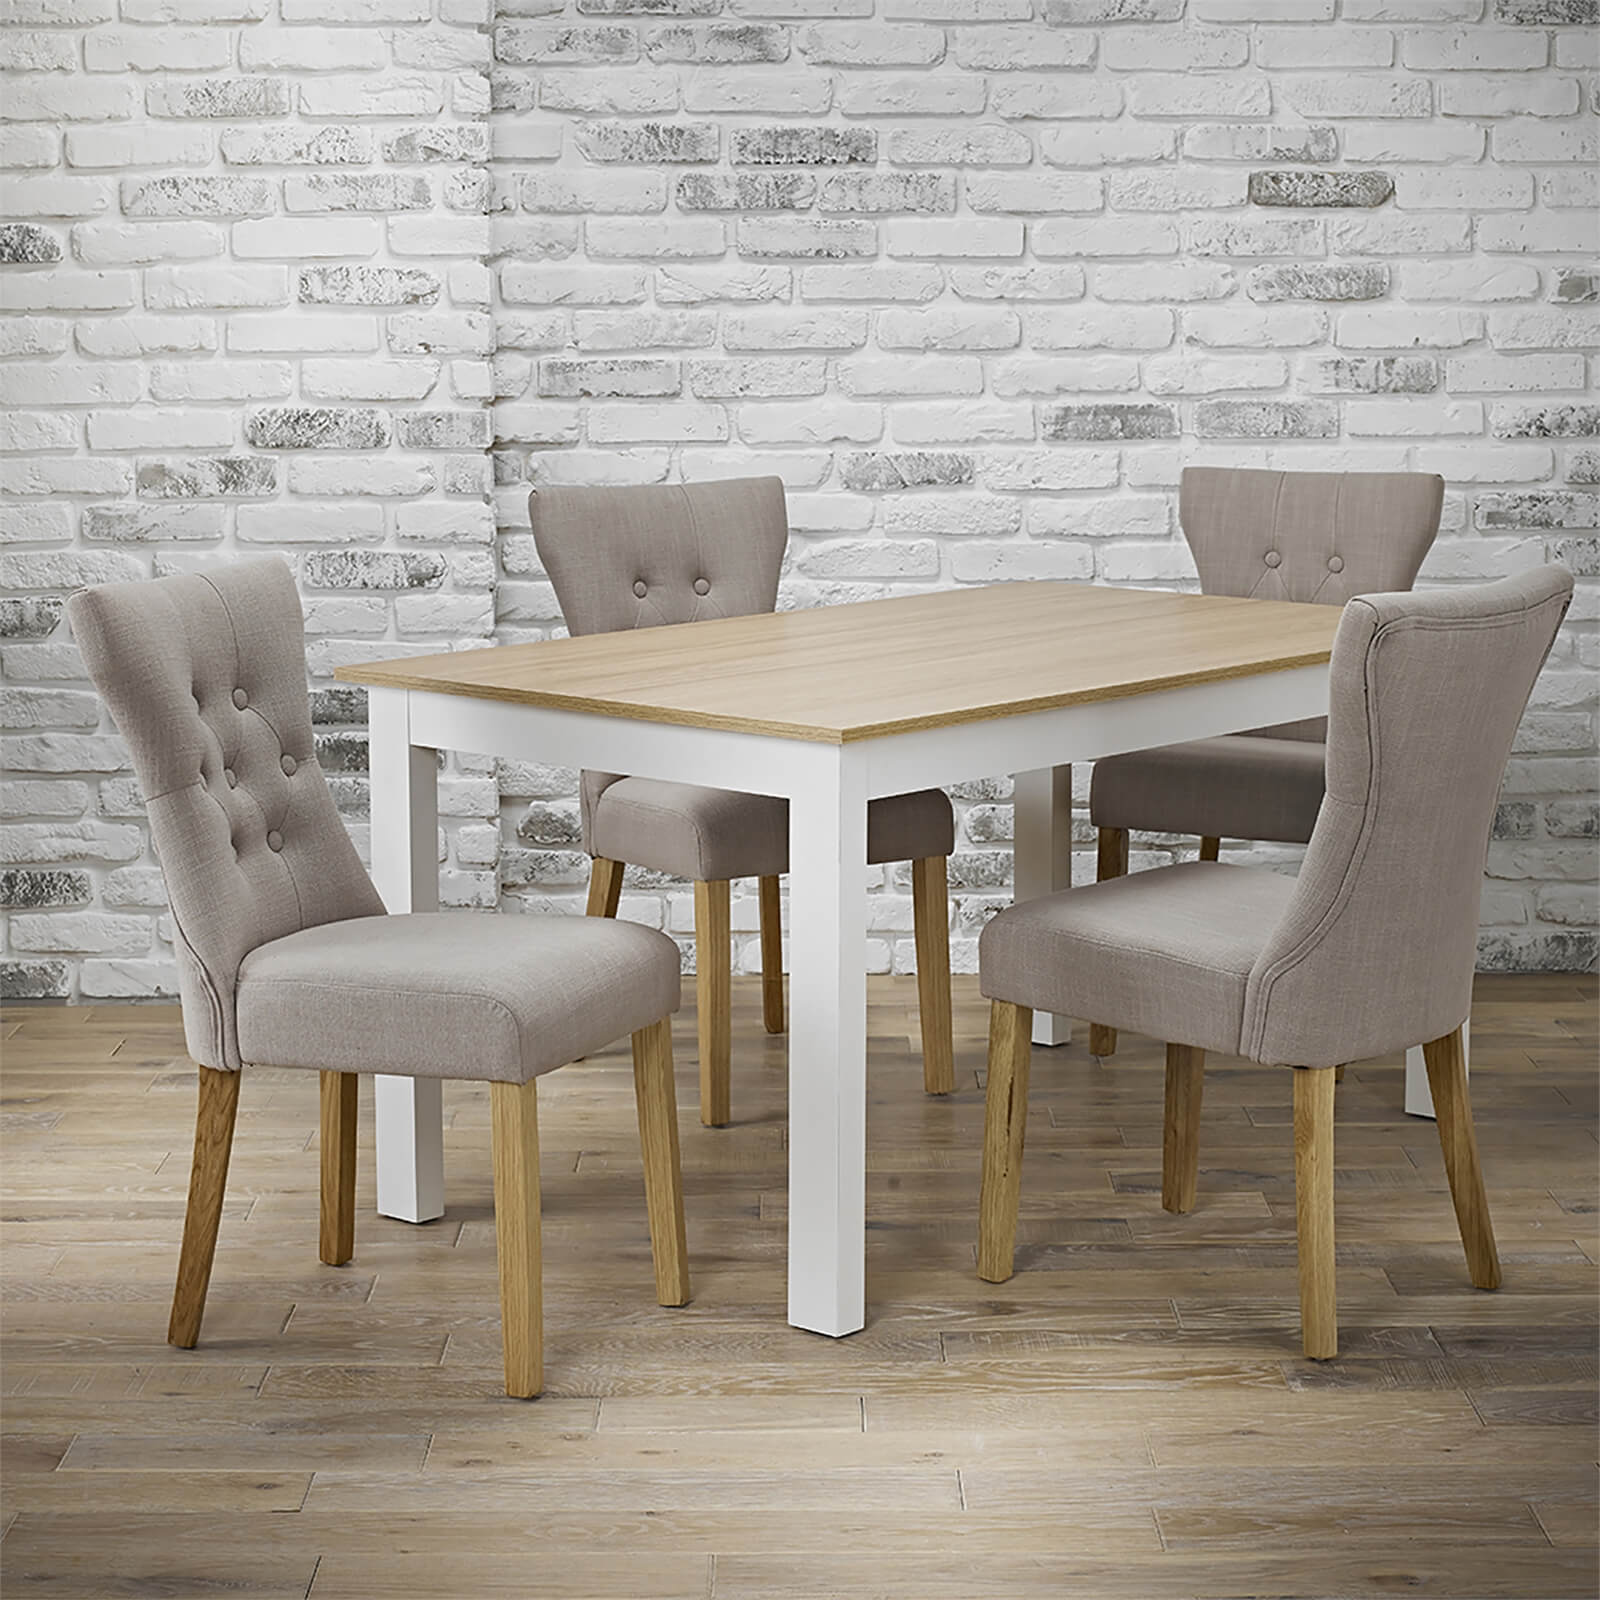 Cotswold 4 Seater Dining Set - Naples Dining Chairs - Cream & Beige